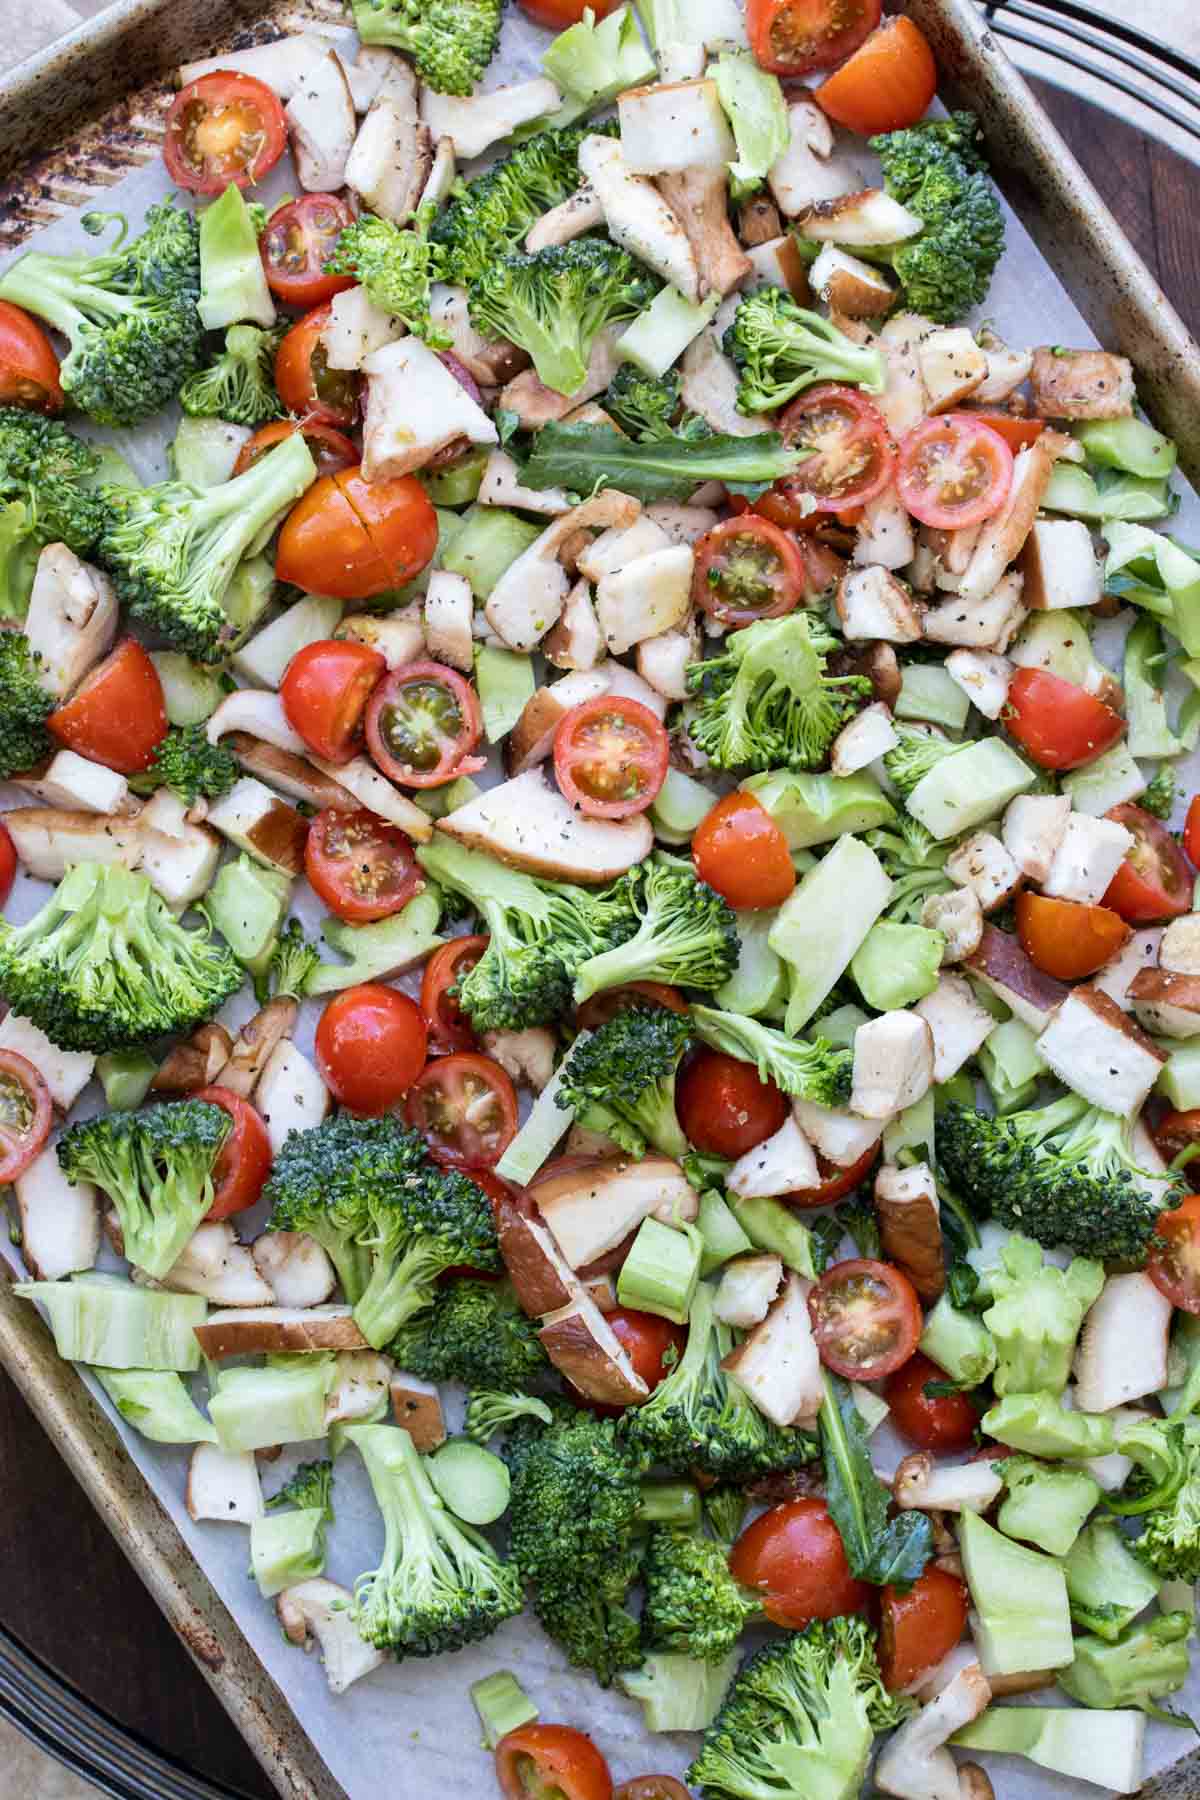 Baking sheet covered with different cut veggies.